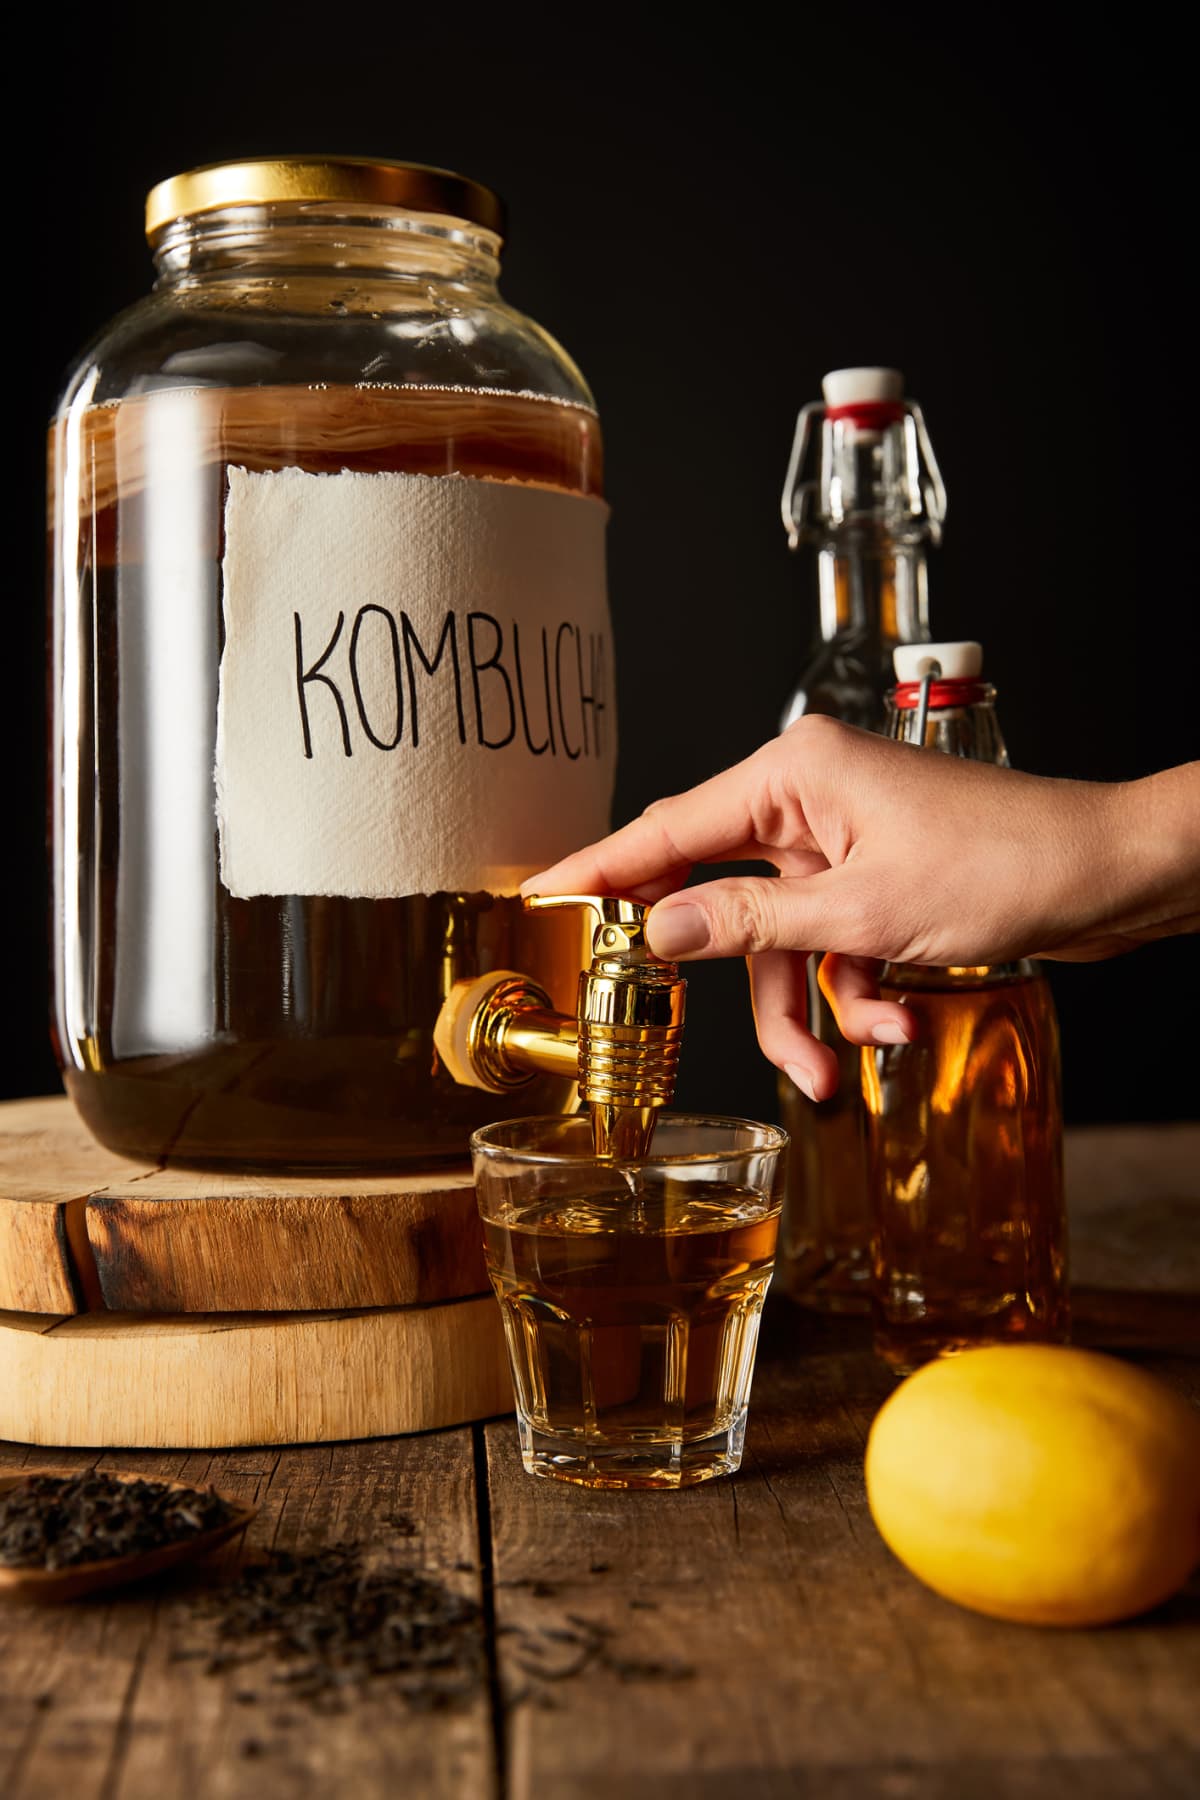 Kombucha being poured into a glass from a jar placed on a wooden surface